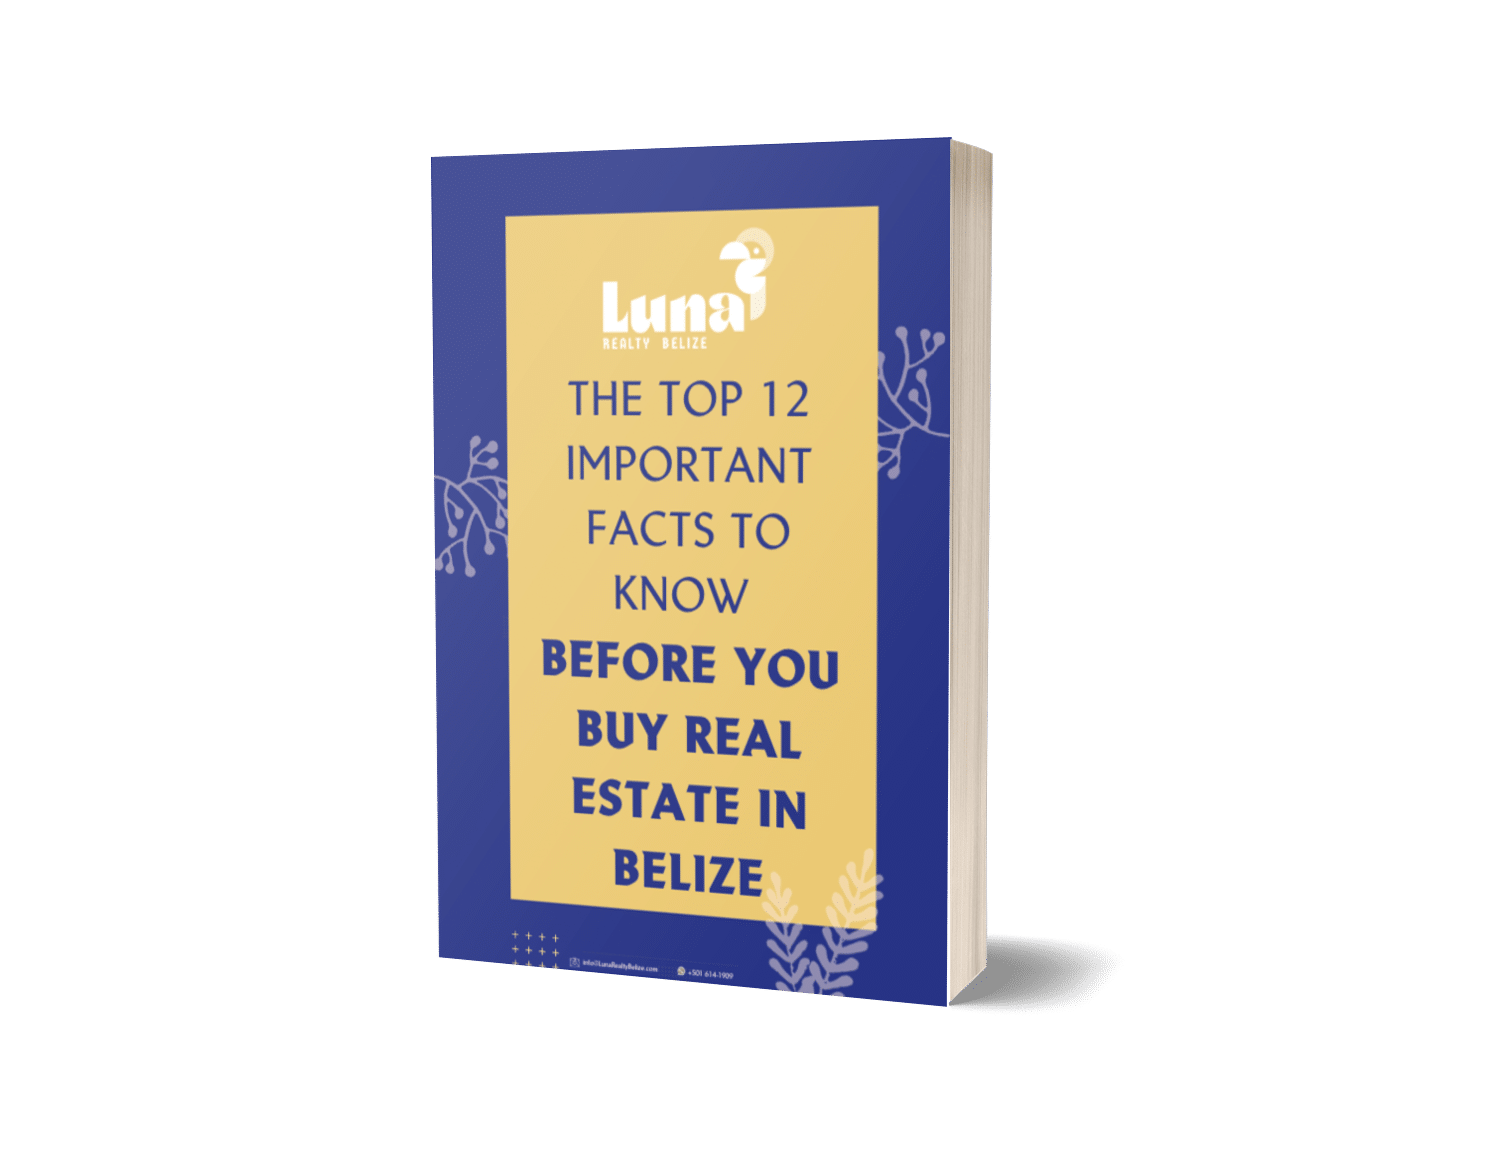 The Top 12 Important Facts to Know BEFORE You Buy Real Estate in Belize